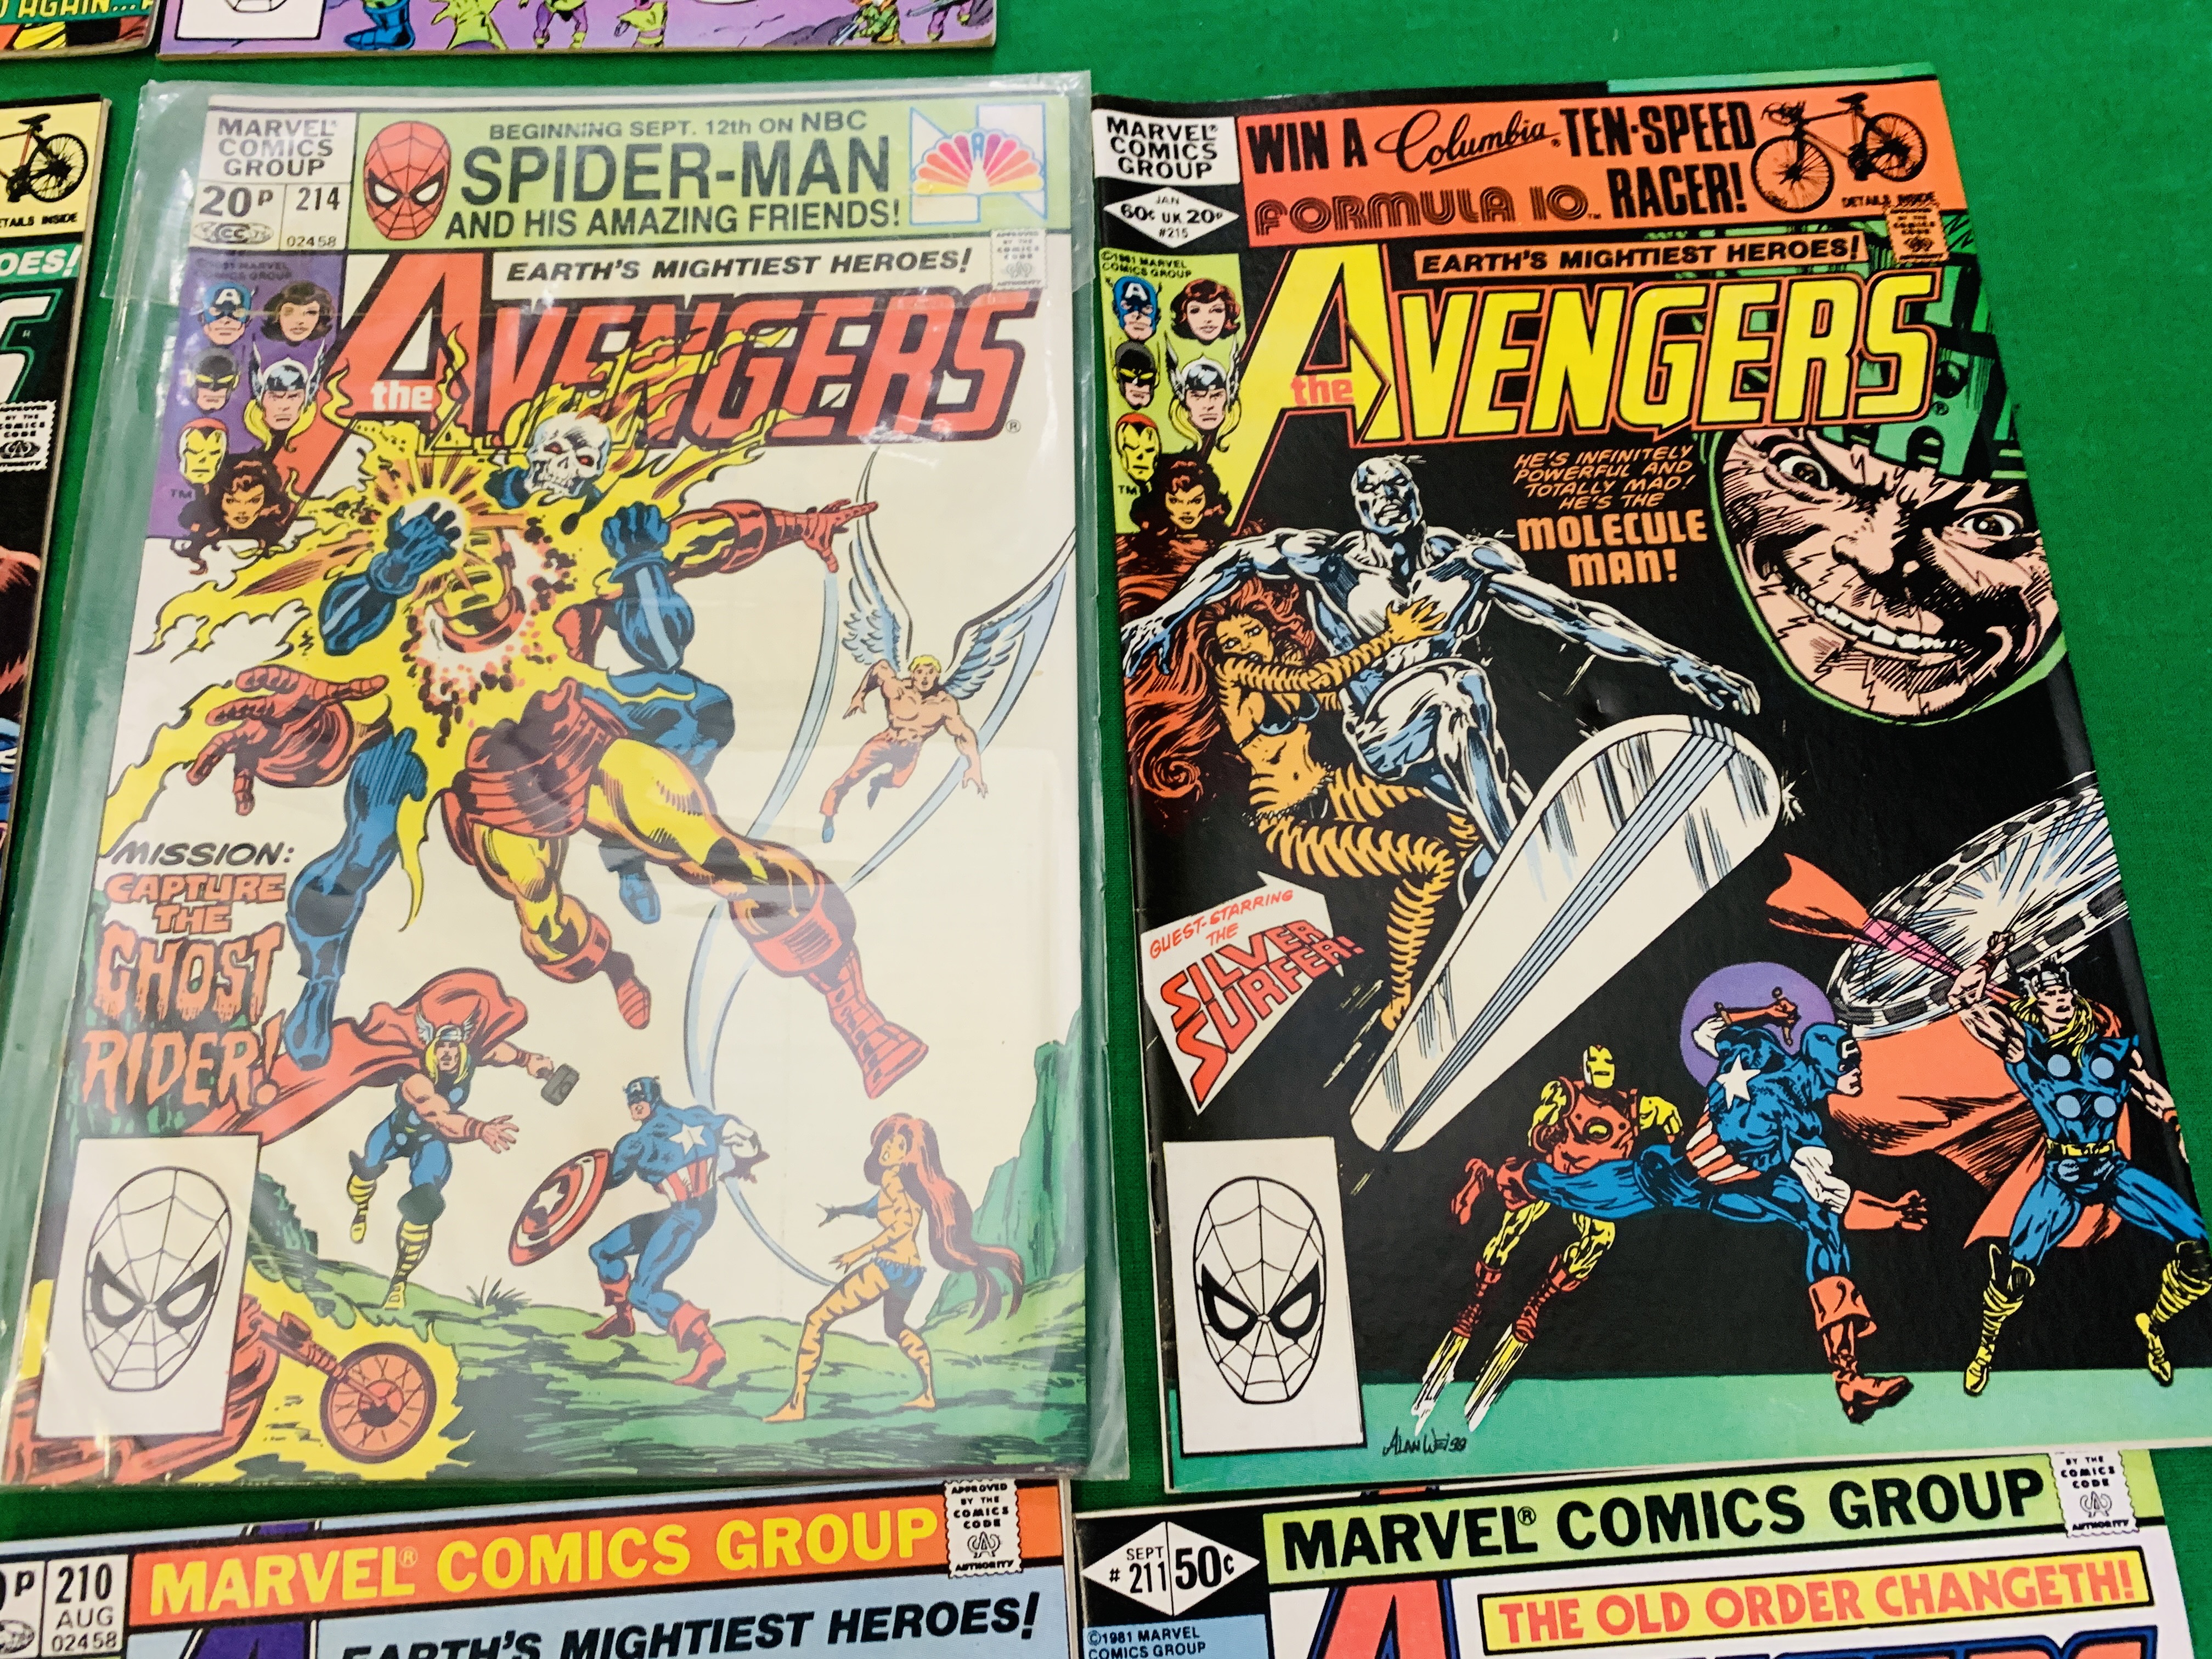 MARVEL COMICS THE AVENGERS NO. 101 - 299, MISSING ISSUES 103 AND 110. - Image 81 of 130